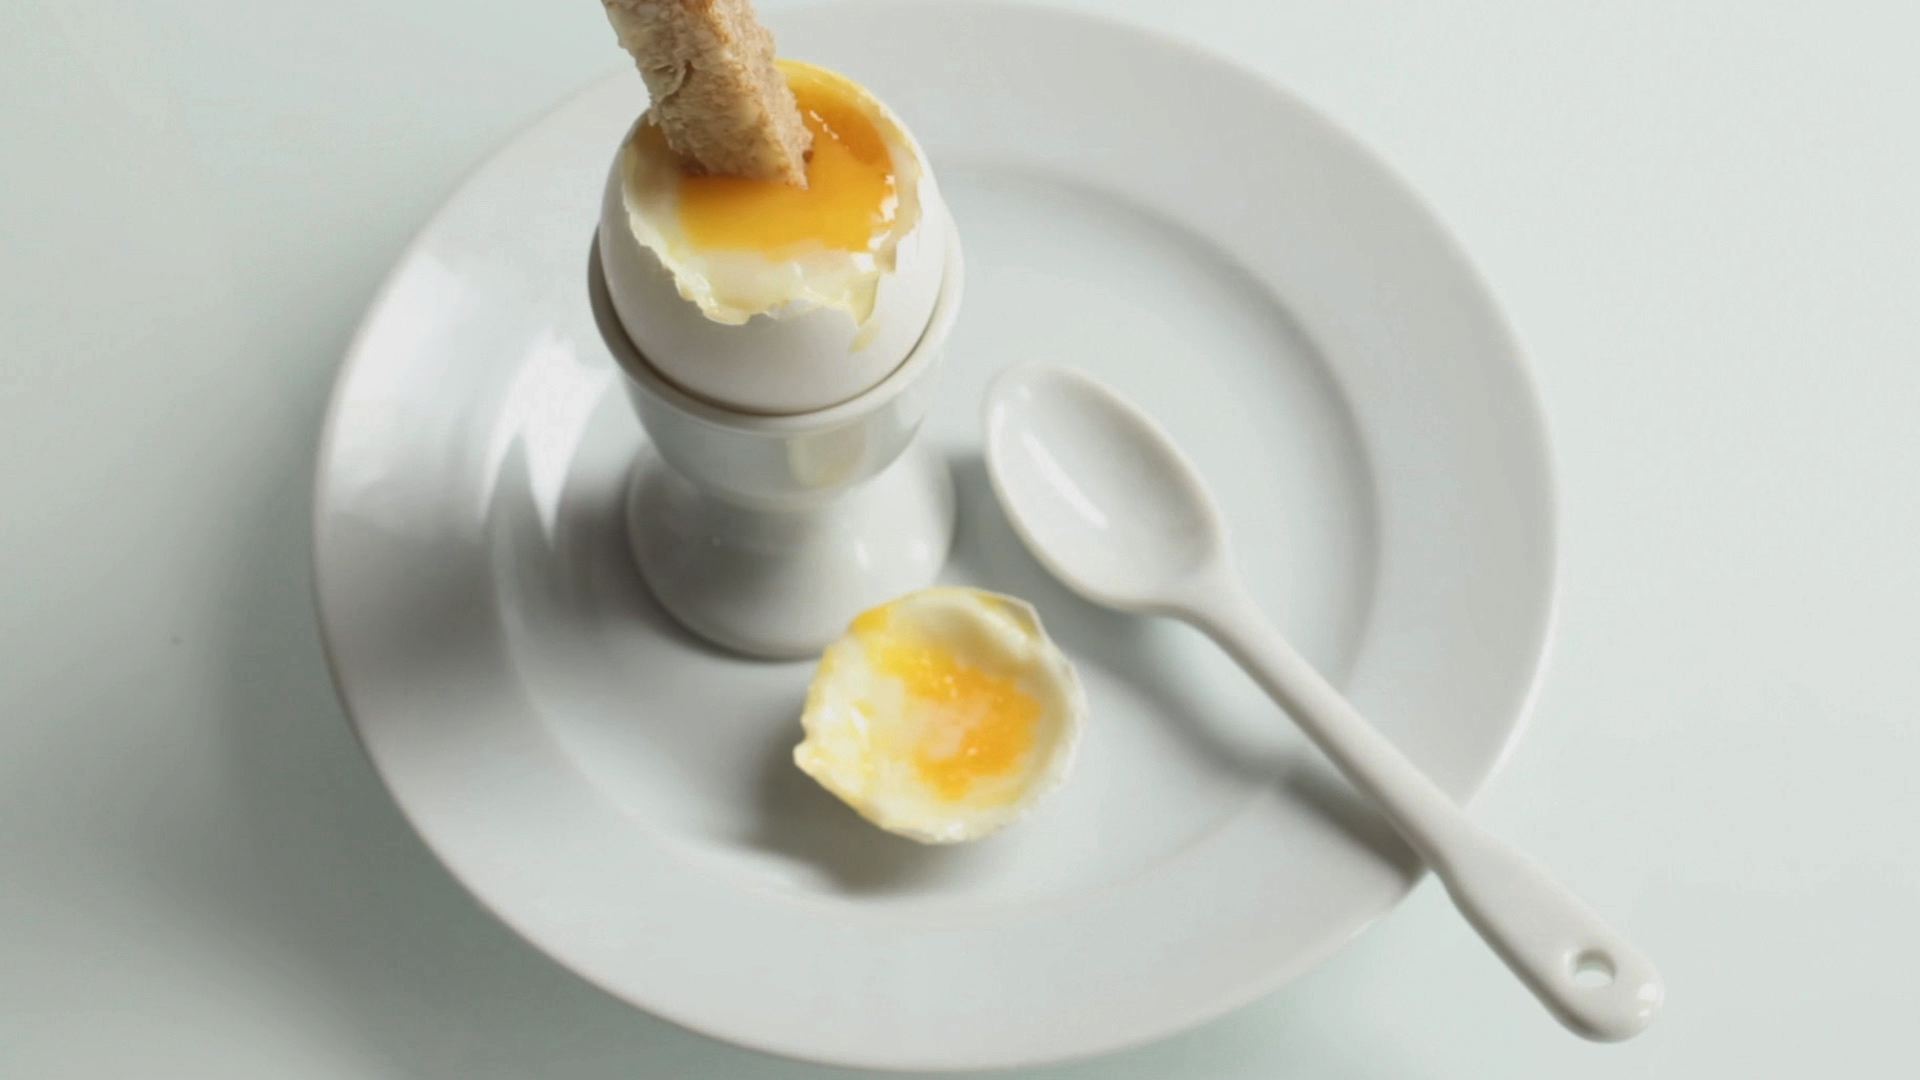 The Perfect Soft-Boiled Egg - The Noshery